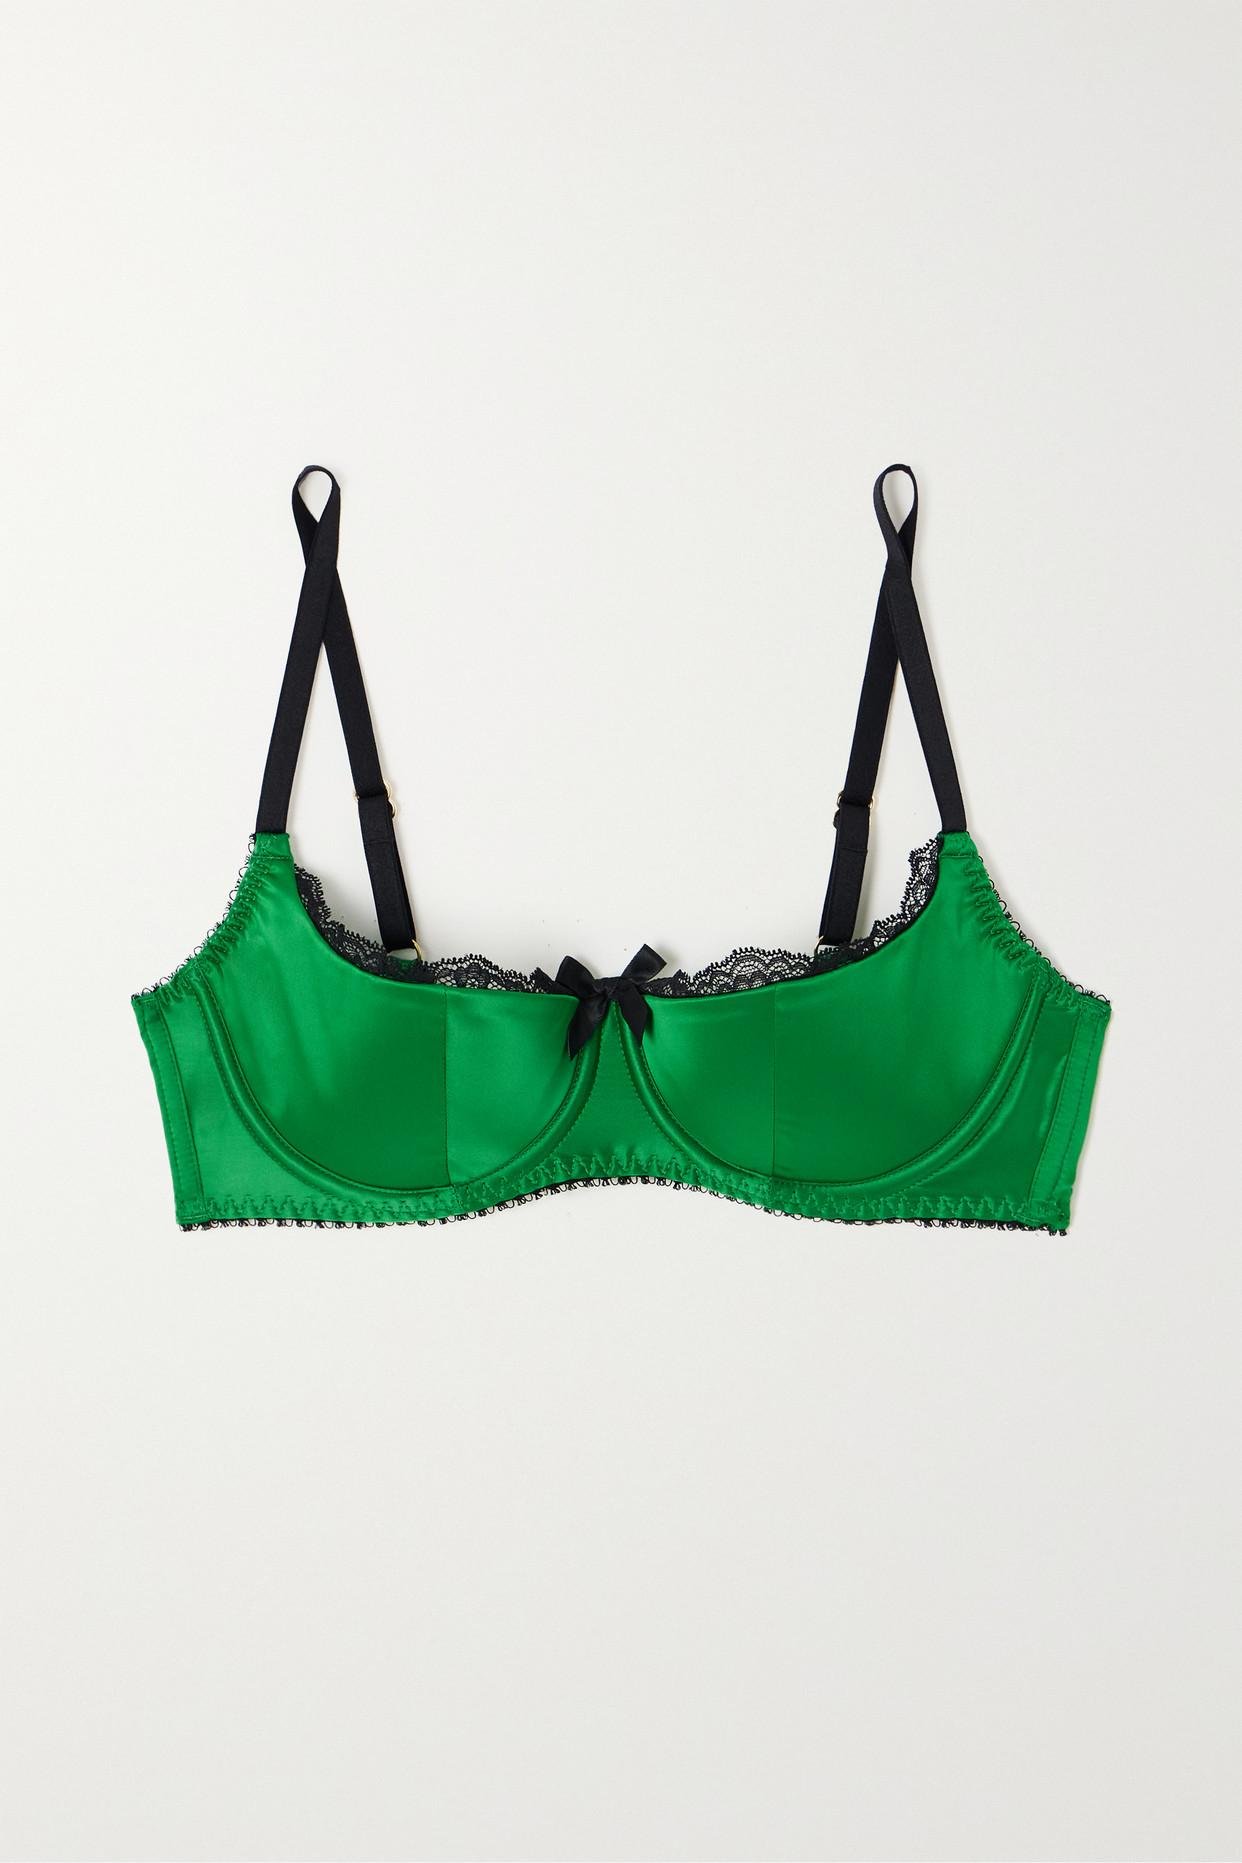 Agent Provocateur Sloane Lace-trimmed Satin Underwired Balconette Bra in  Green